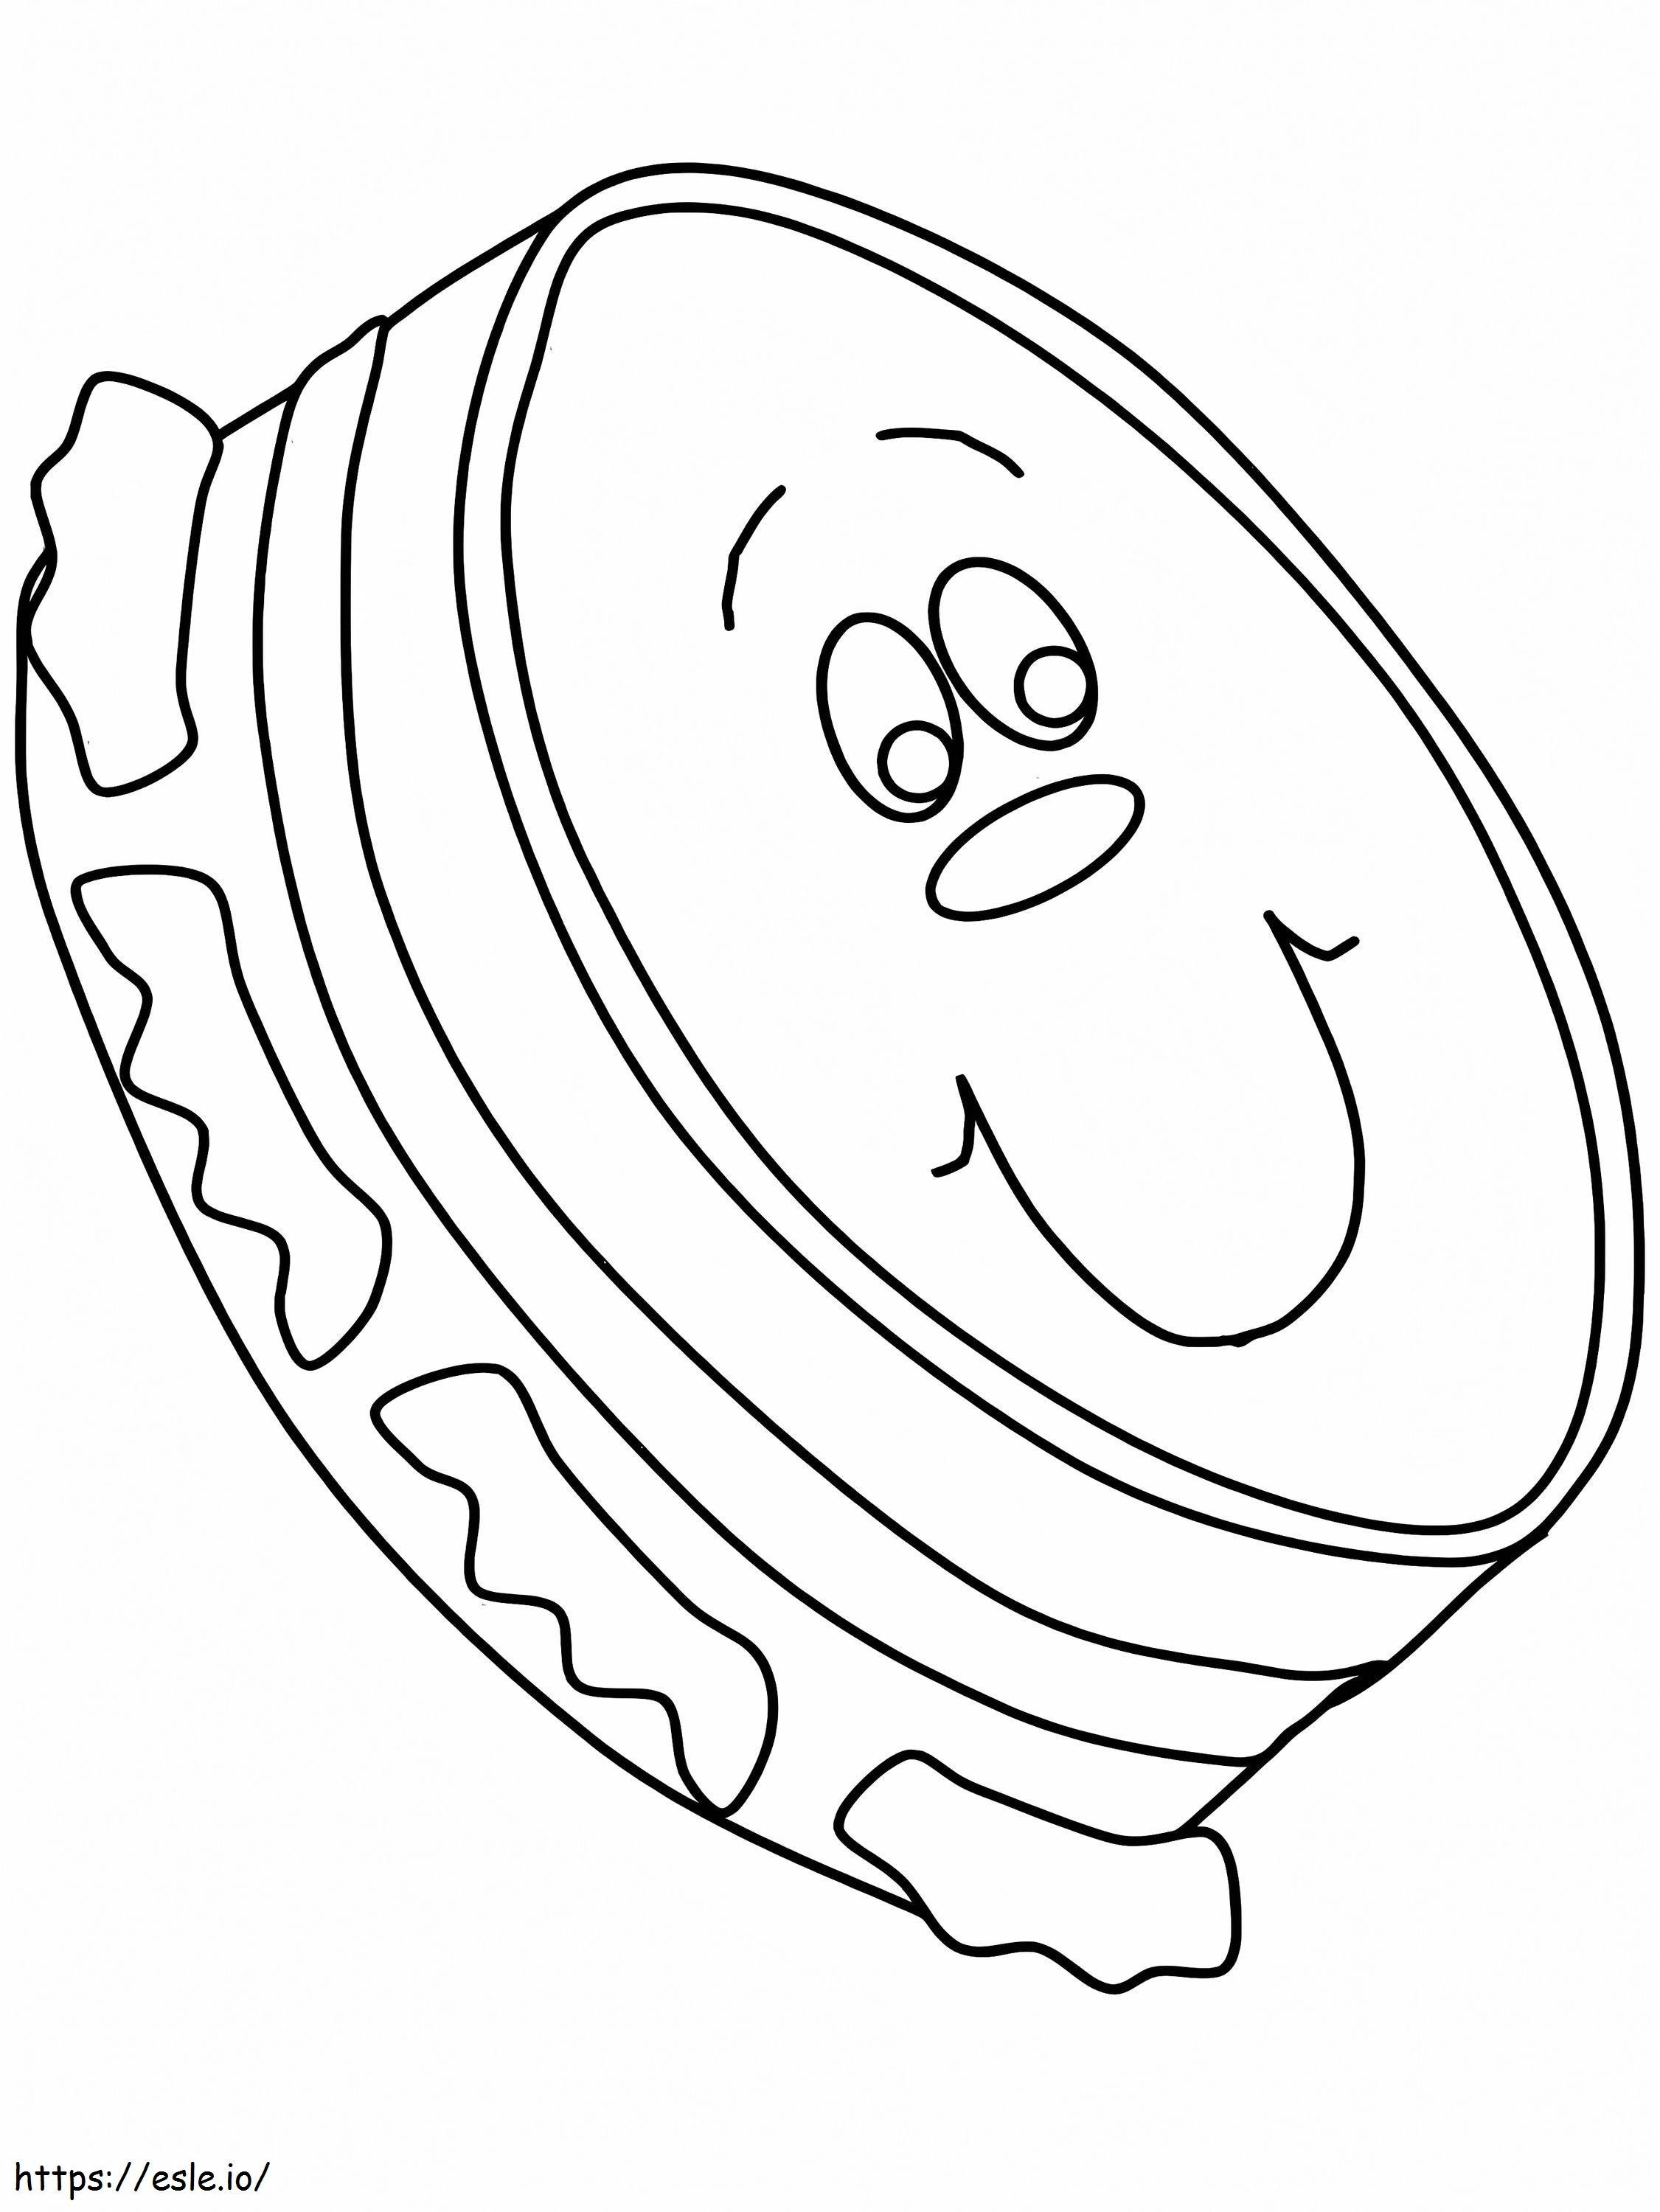 Cute Tambourine coloring page